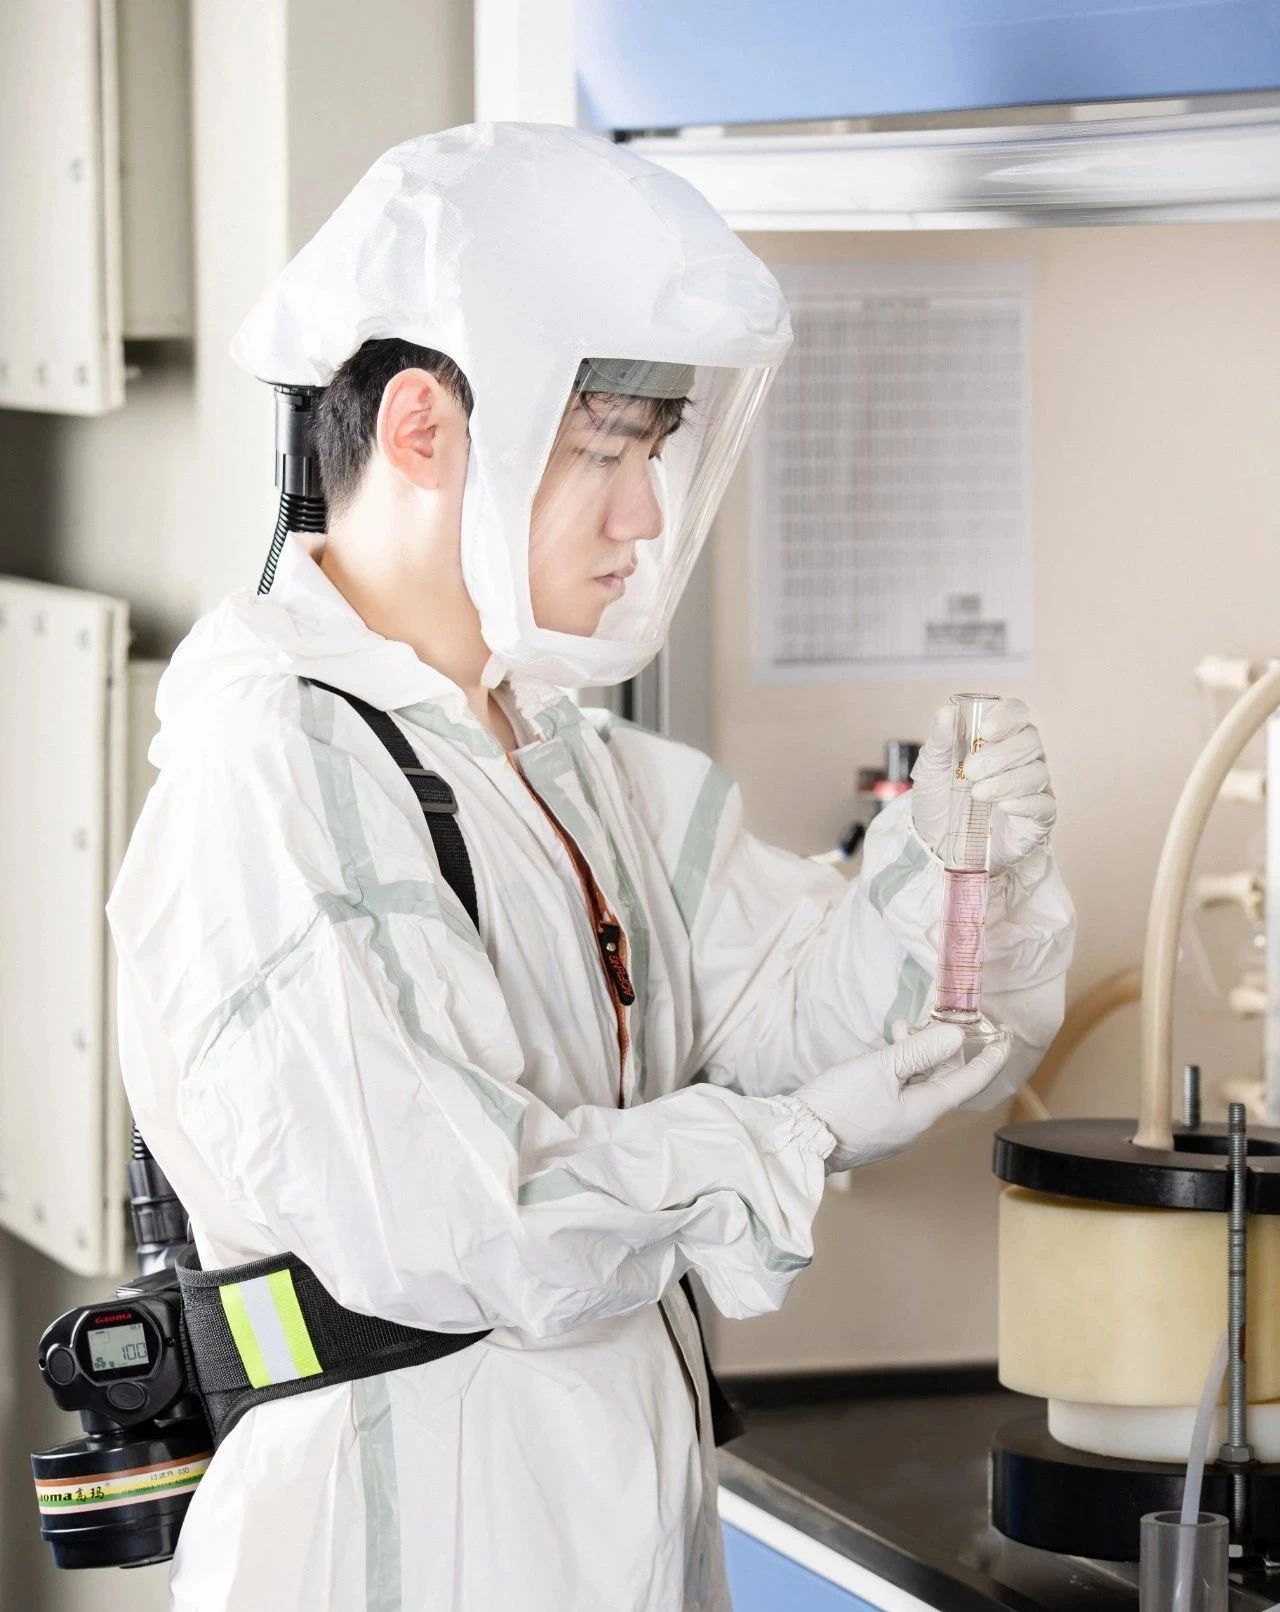 Where should the power supply air filter respirator be used?